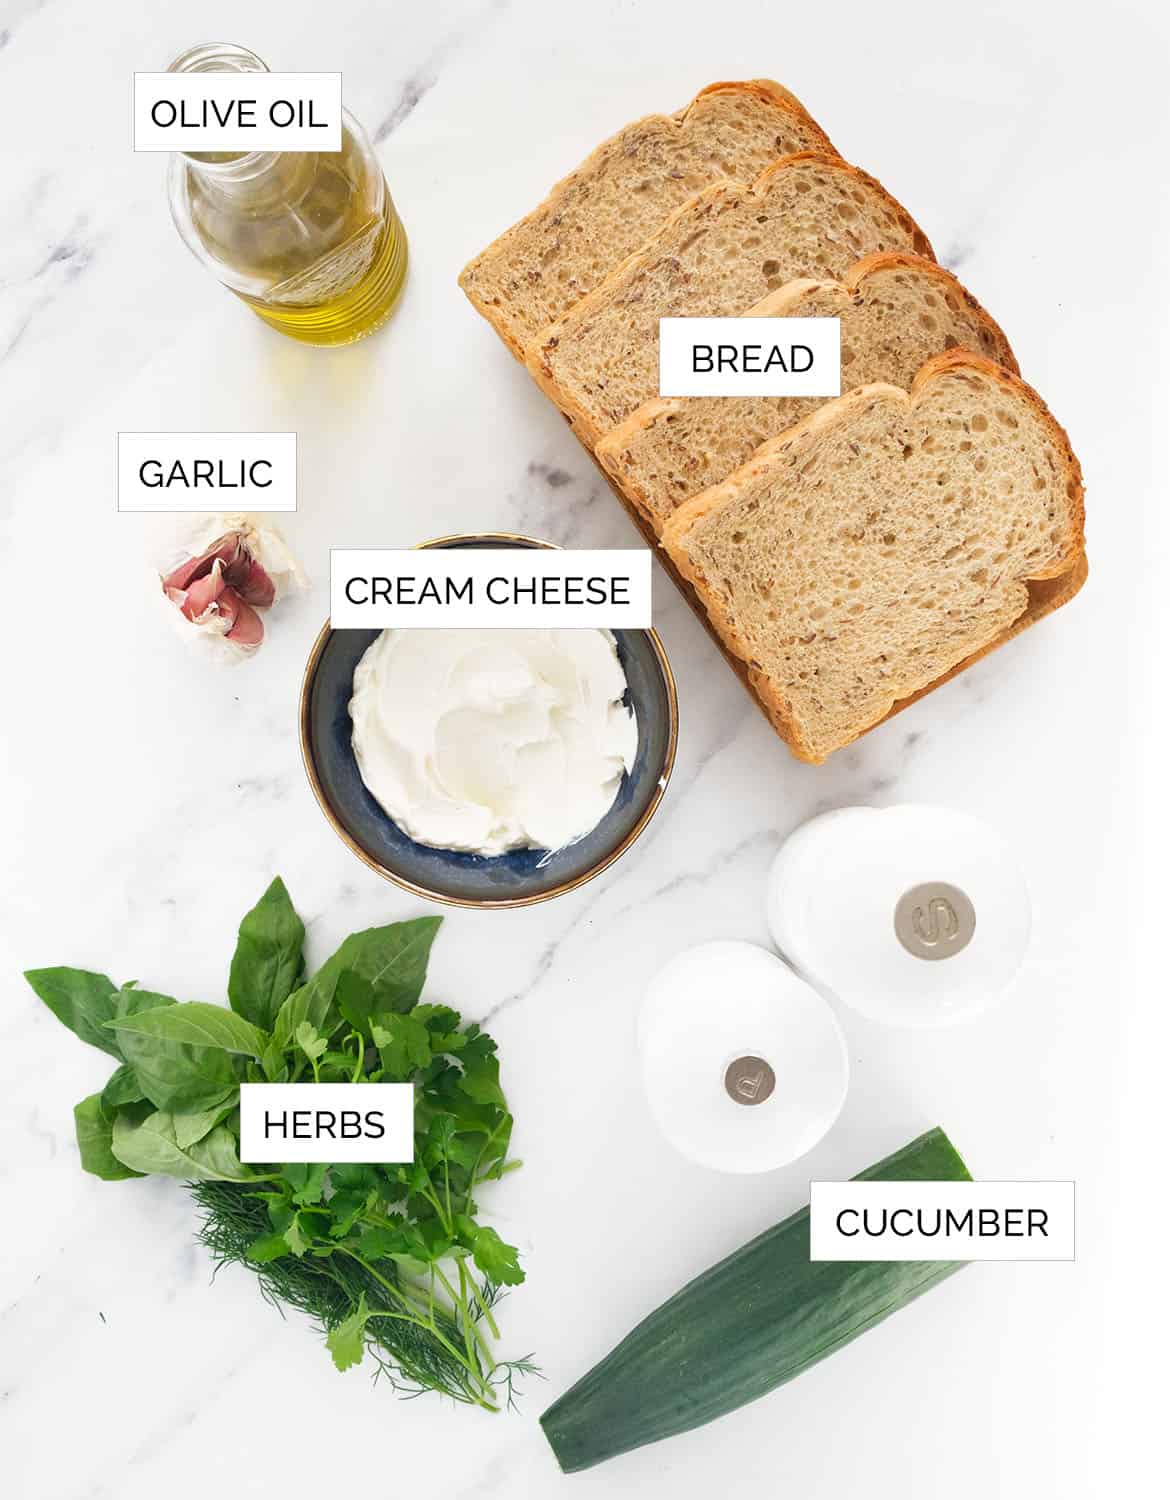 The ingredients to make this cream cheese sandwich are arranged over a white background.